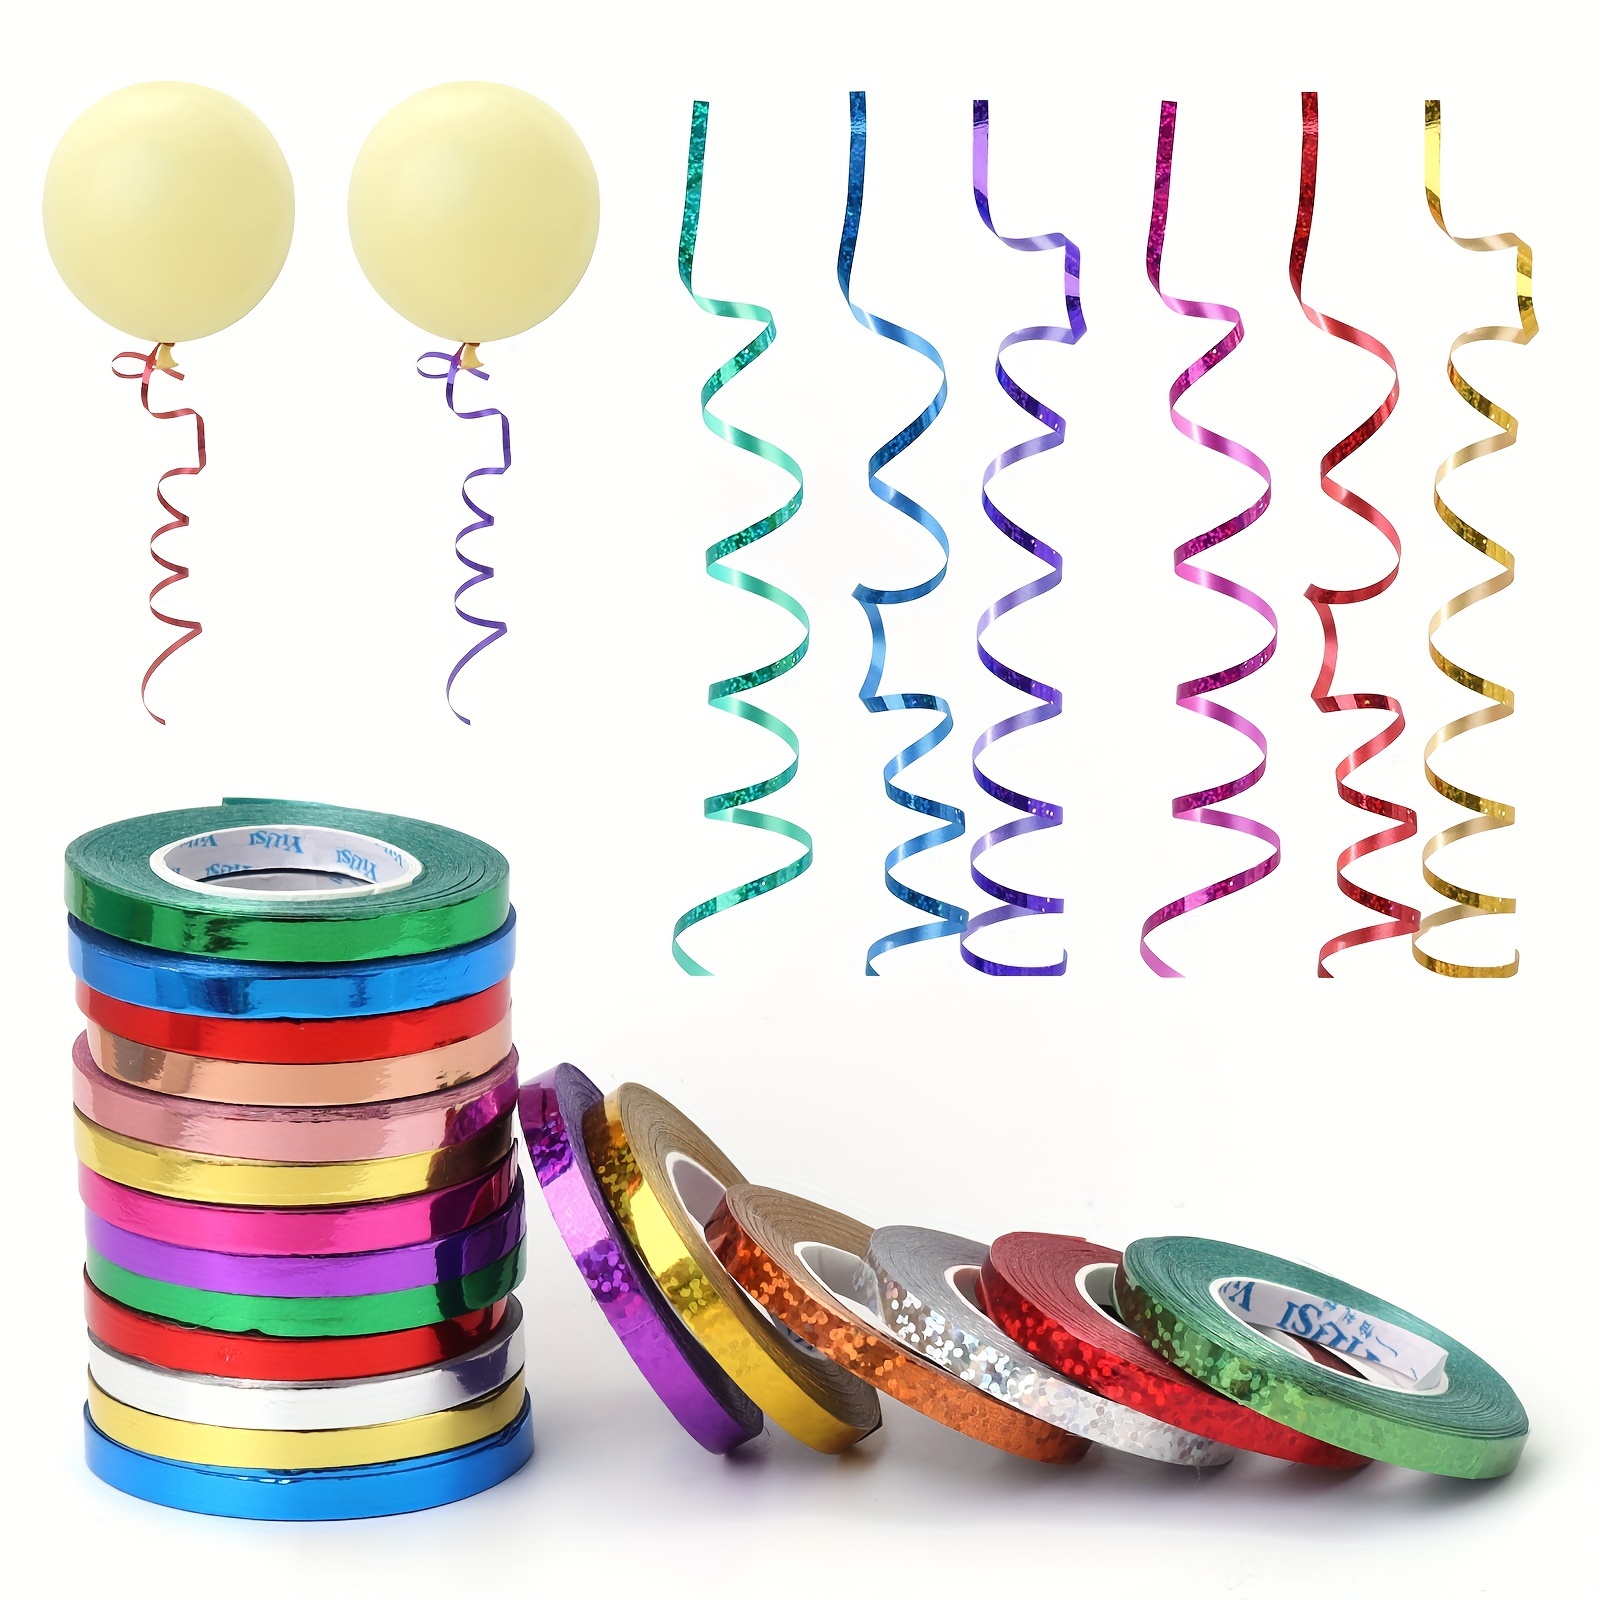 30 METERS BALLOON CURLING RIBBON FOR PARTY GIFT WRAPPING BALLOONS STRING  TIE new